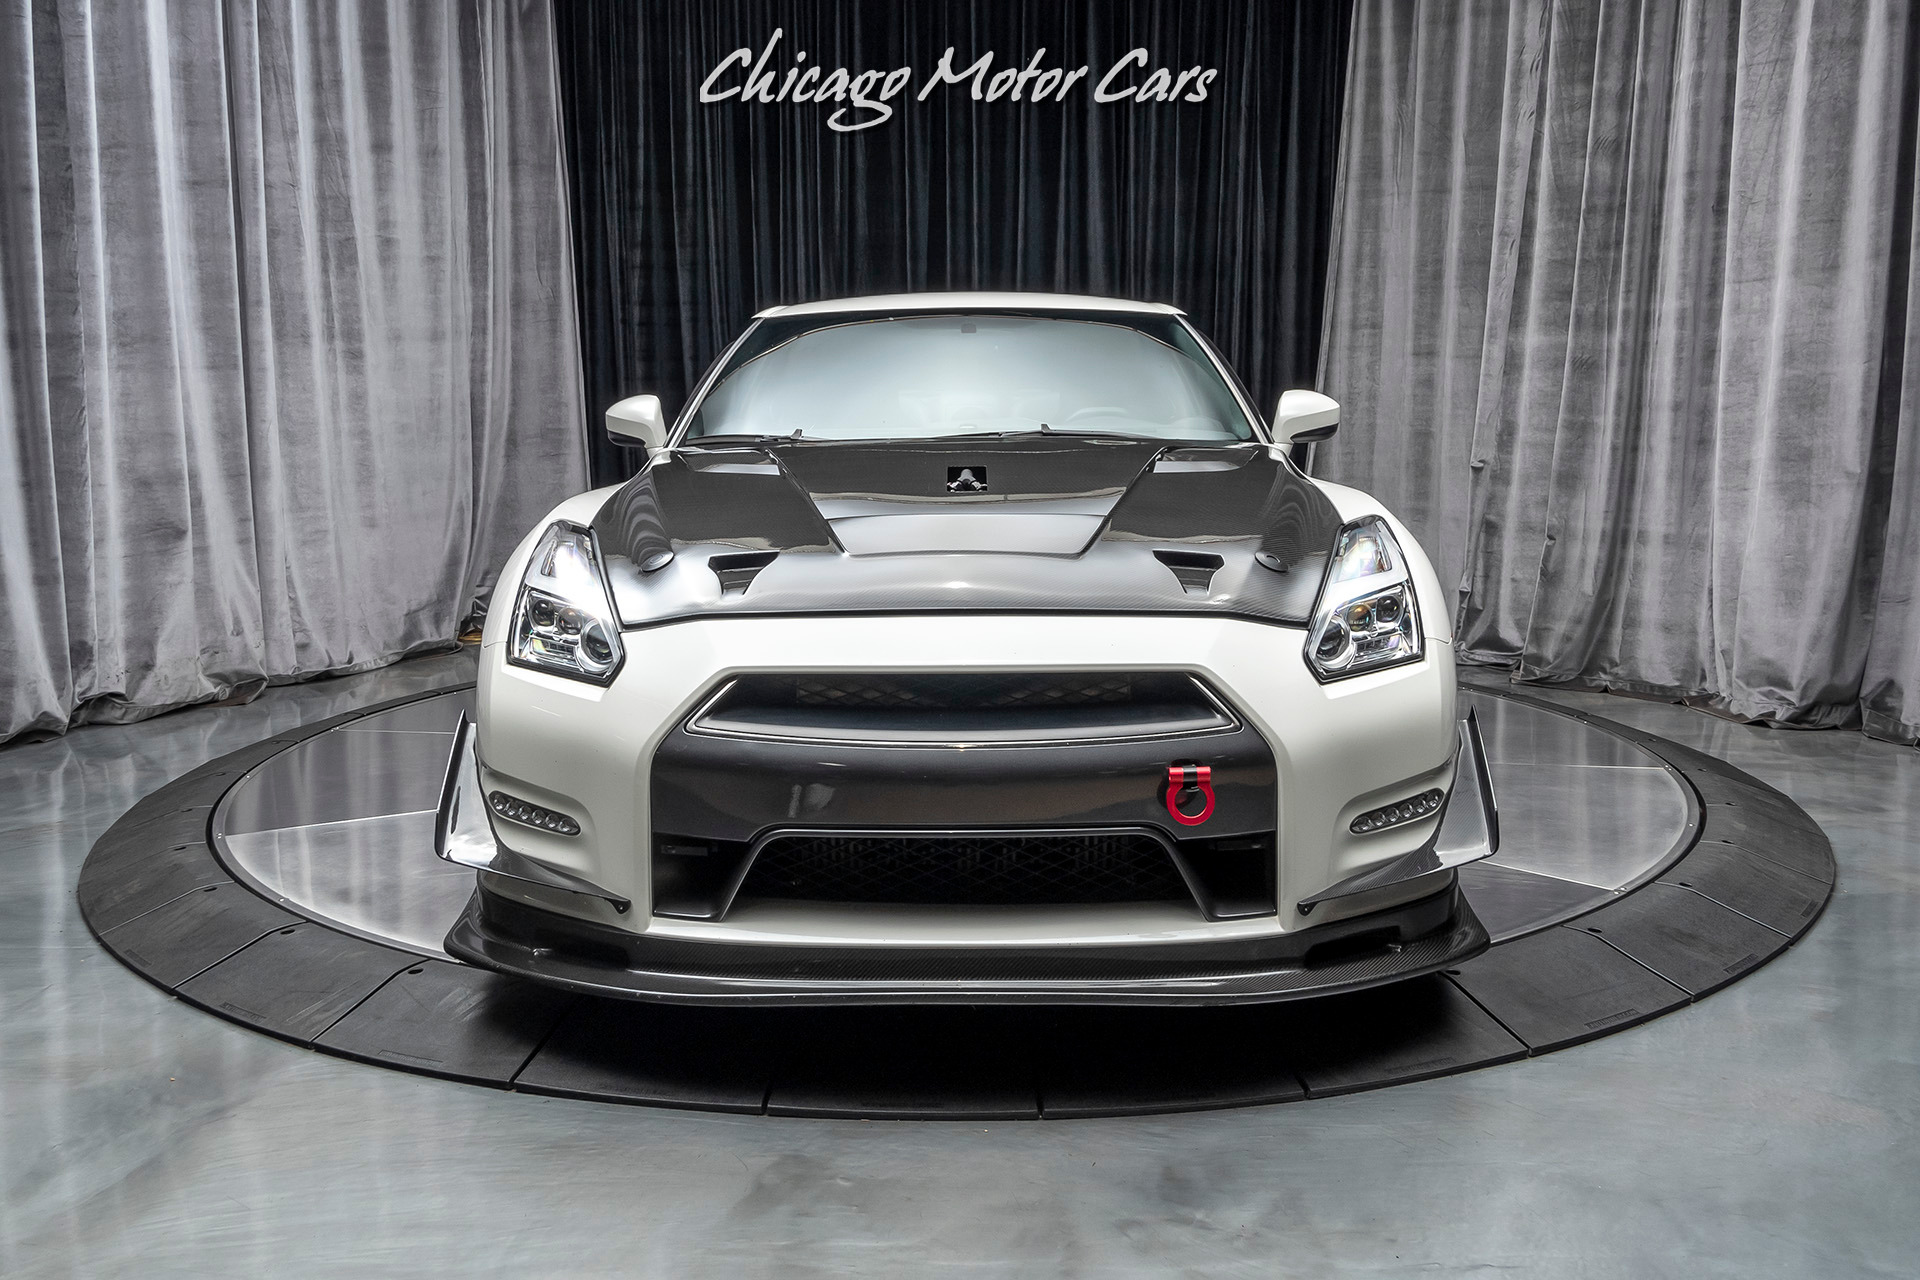 Used-2015-Nissan-GT-R-Black-Edition-MOTEC-1200WHP-STAGE-4-TRANSMISSION